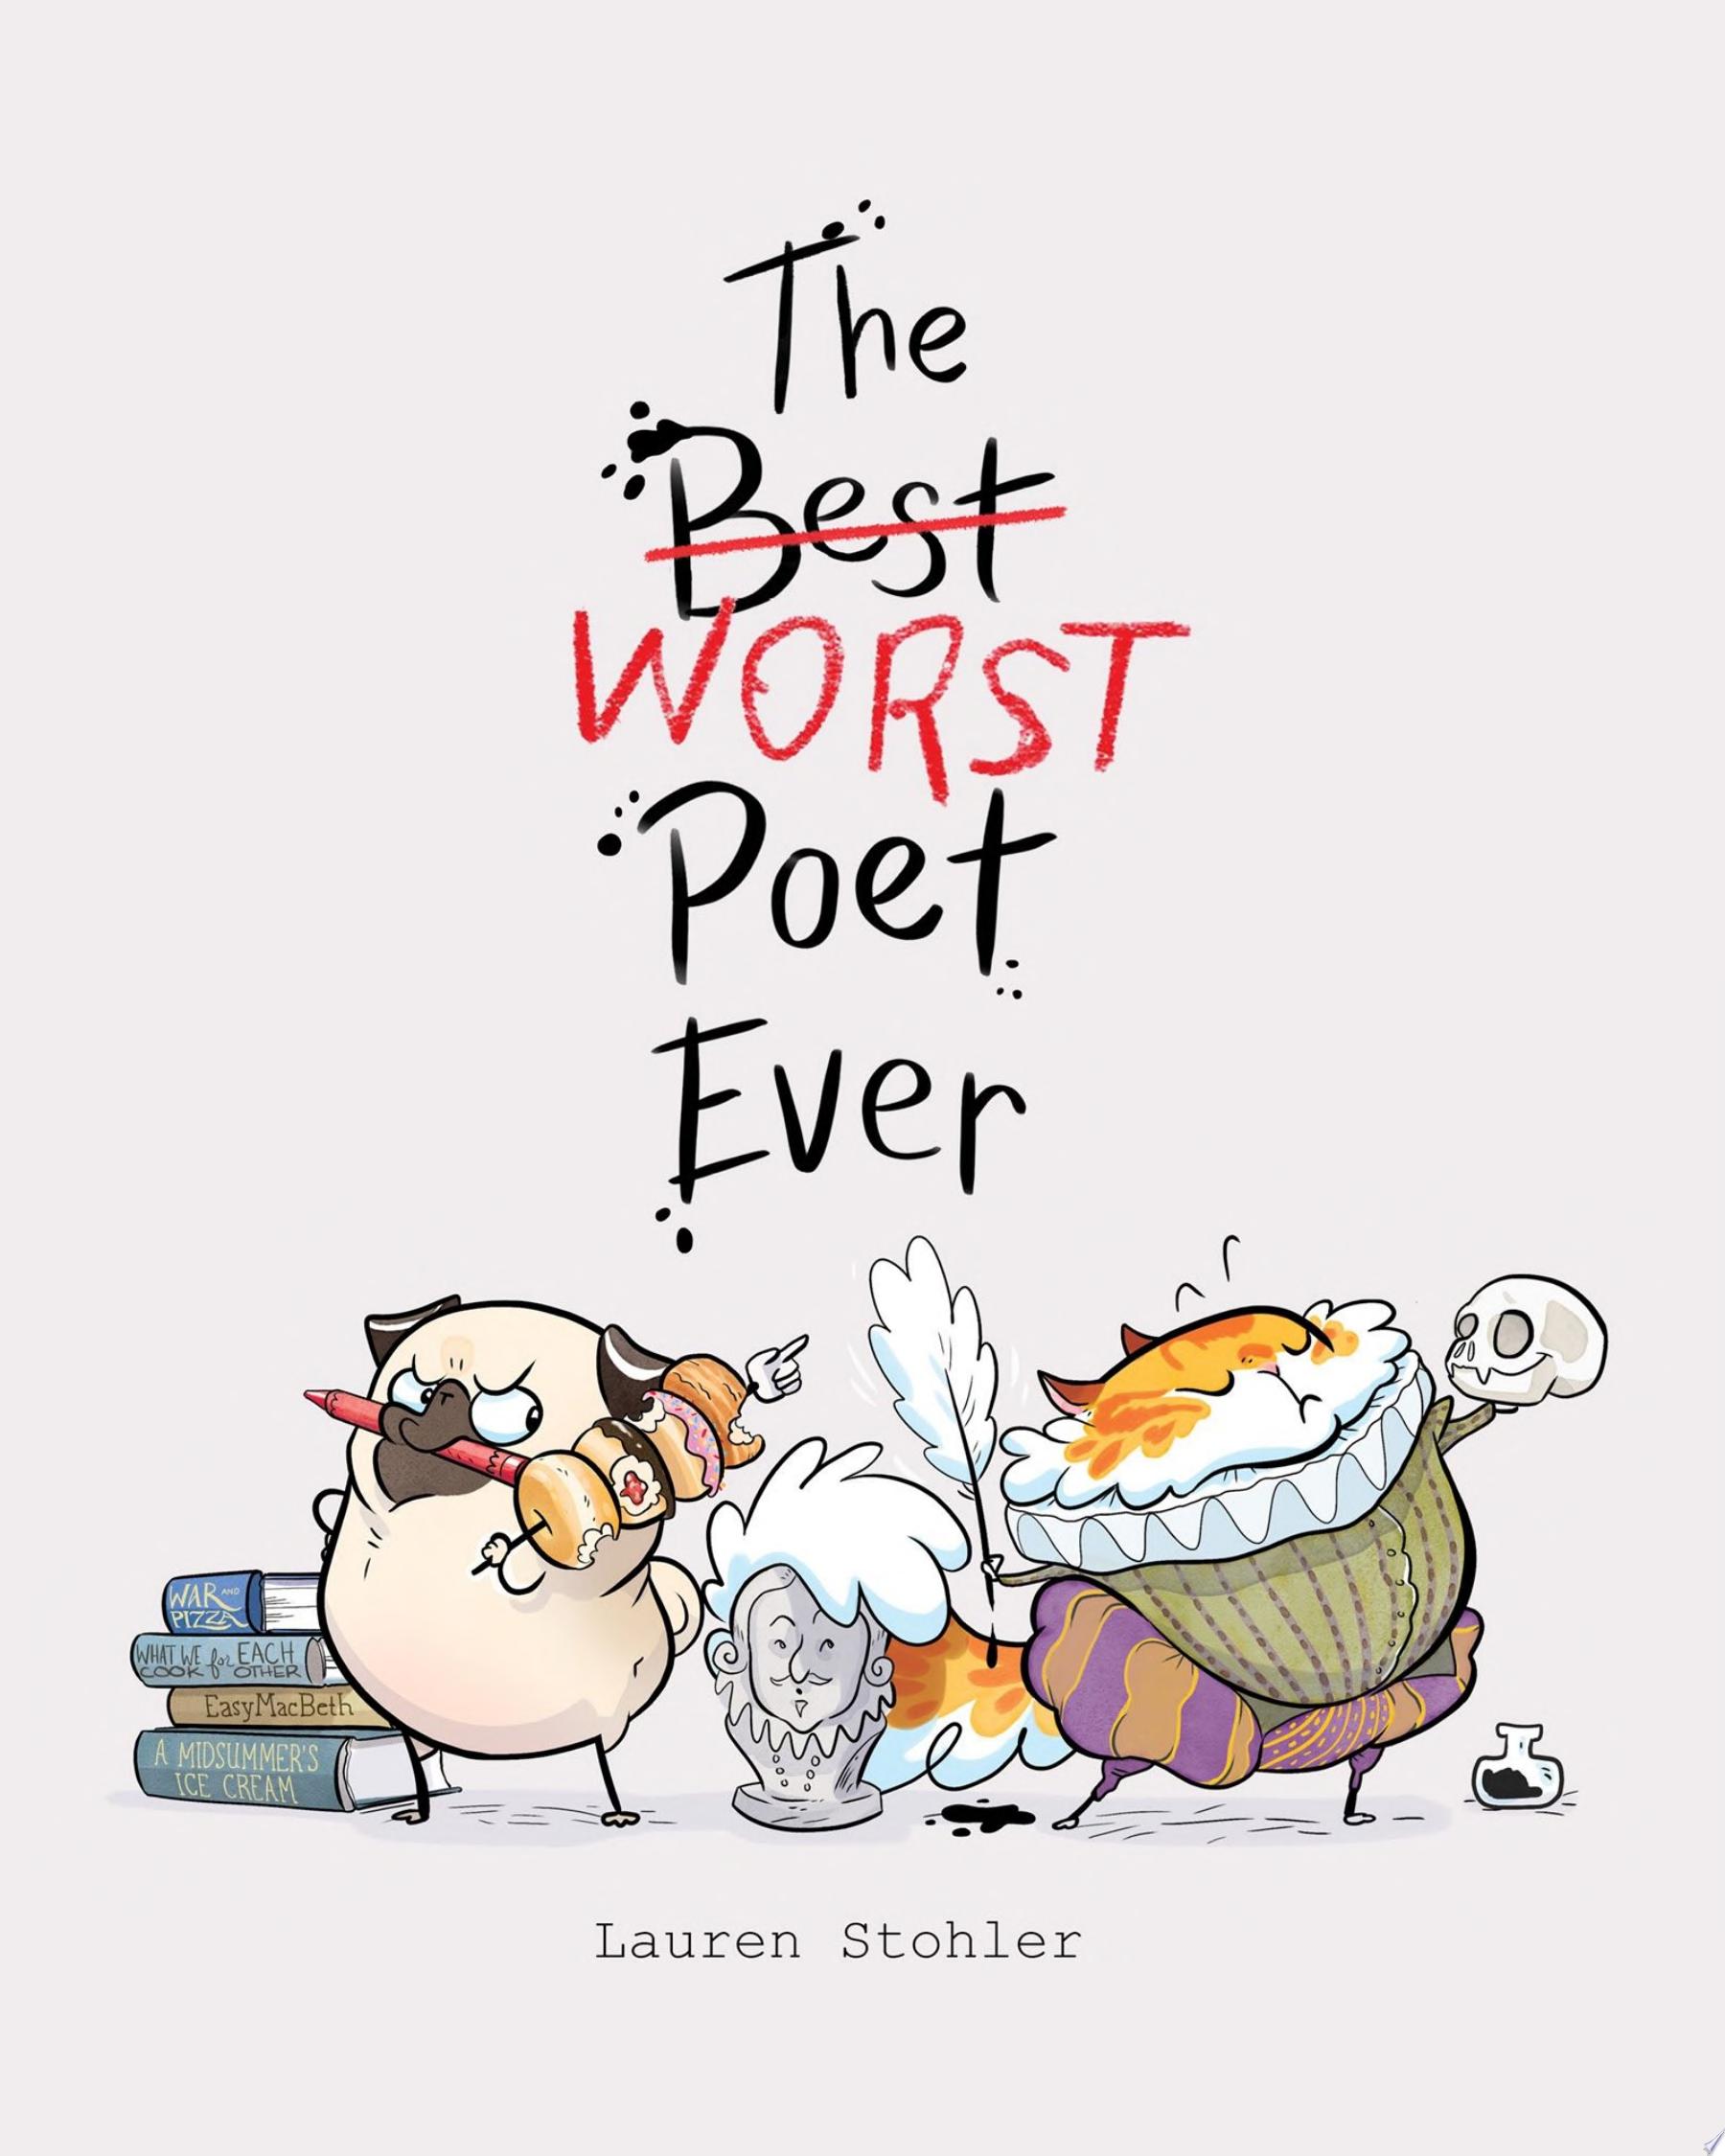 Image for "The Best Worst Poet Ever"